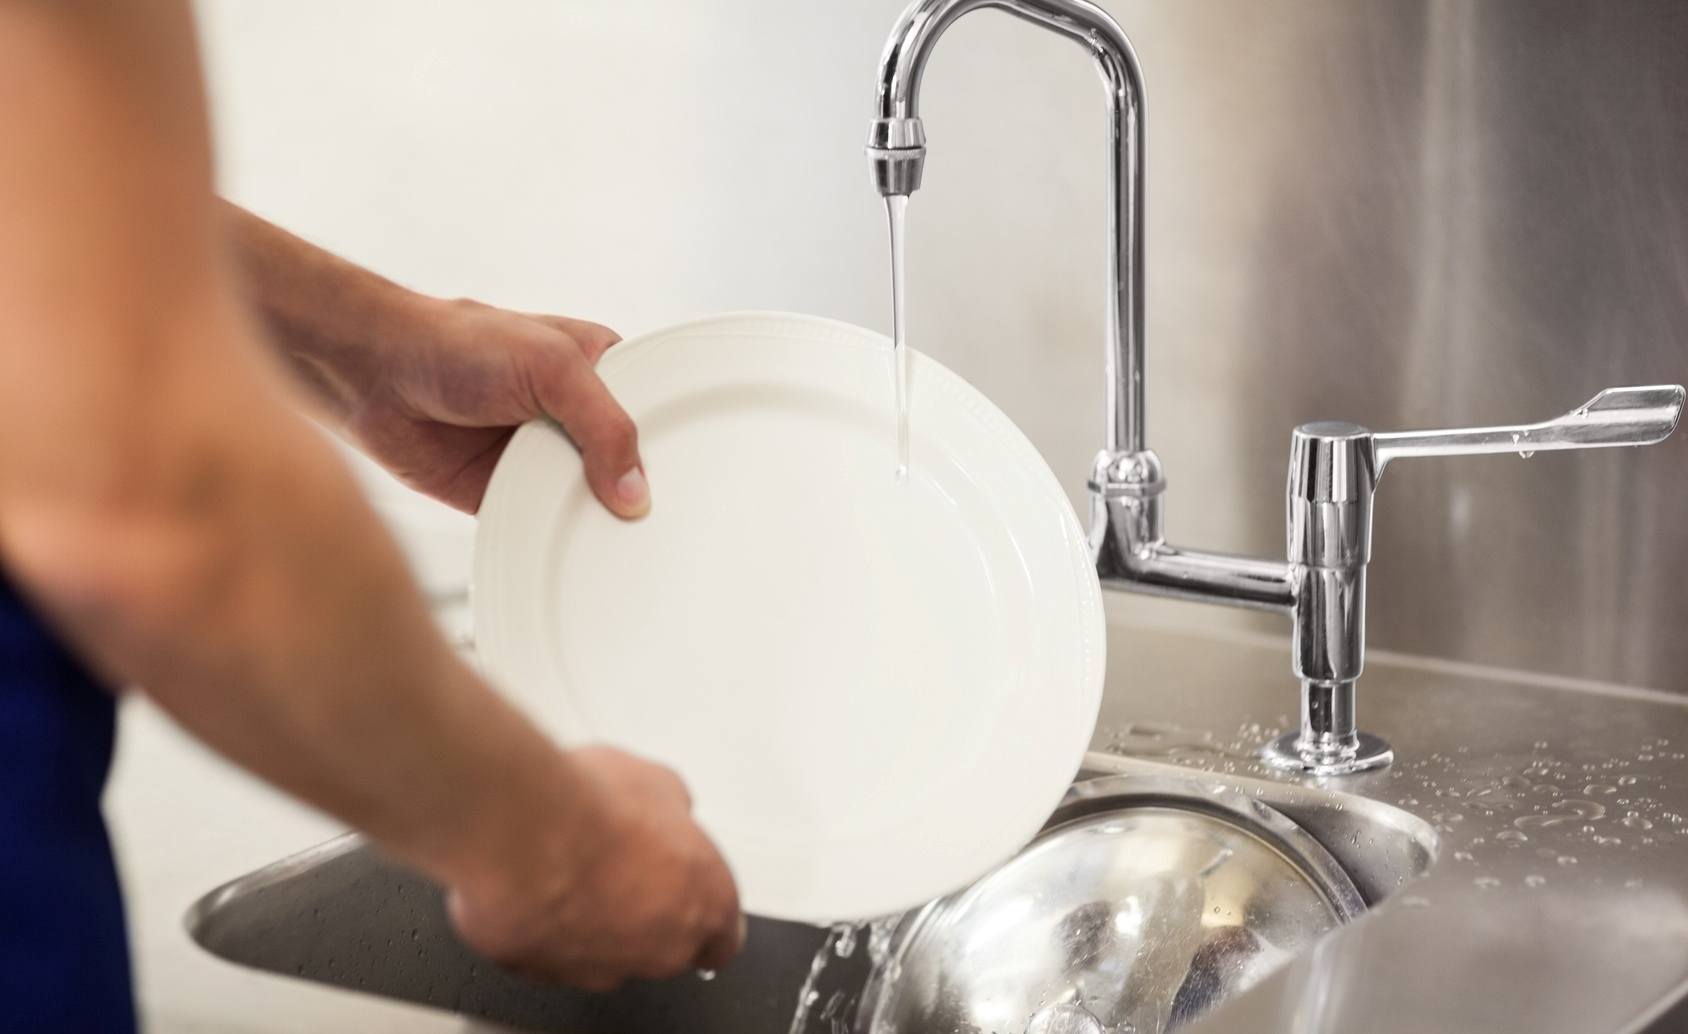 Guidelines For Washing Tableware In A Three-Compartment Sink